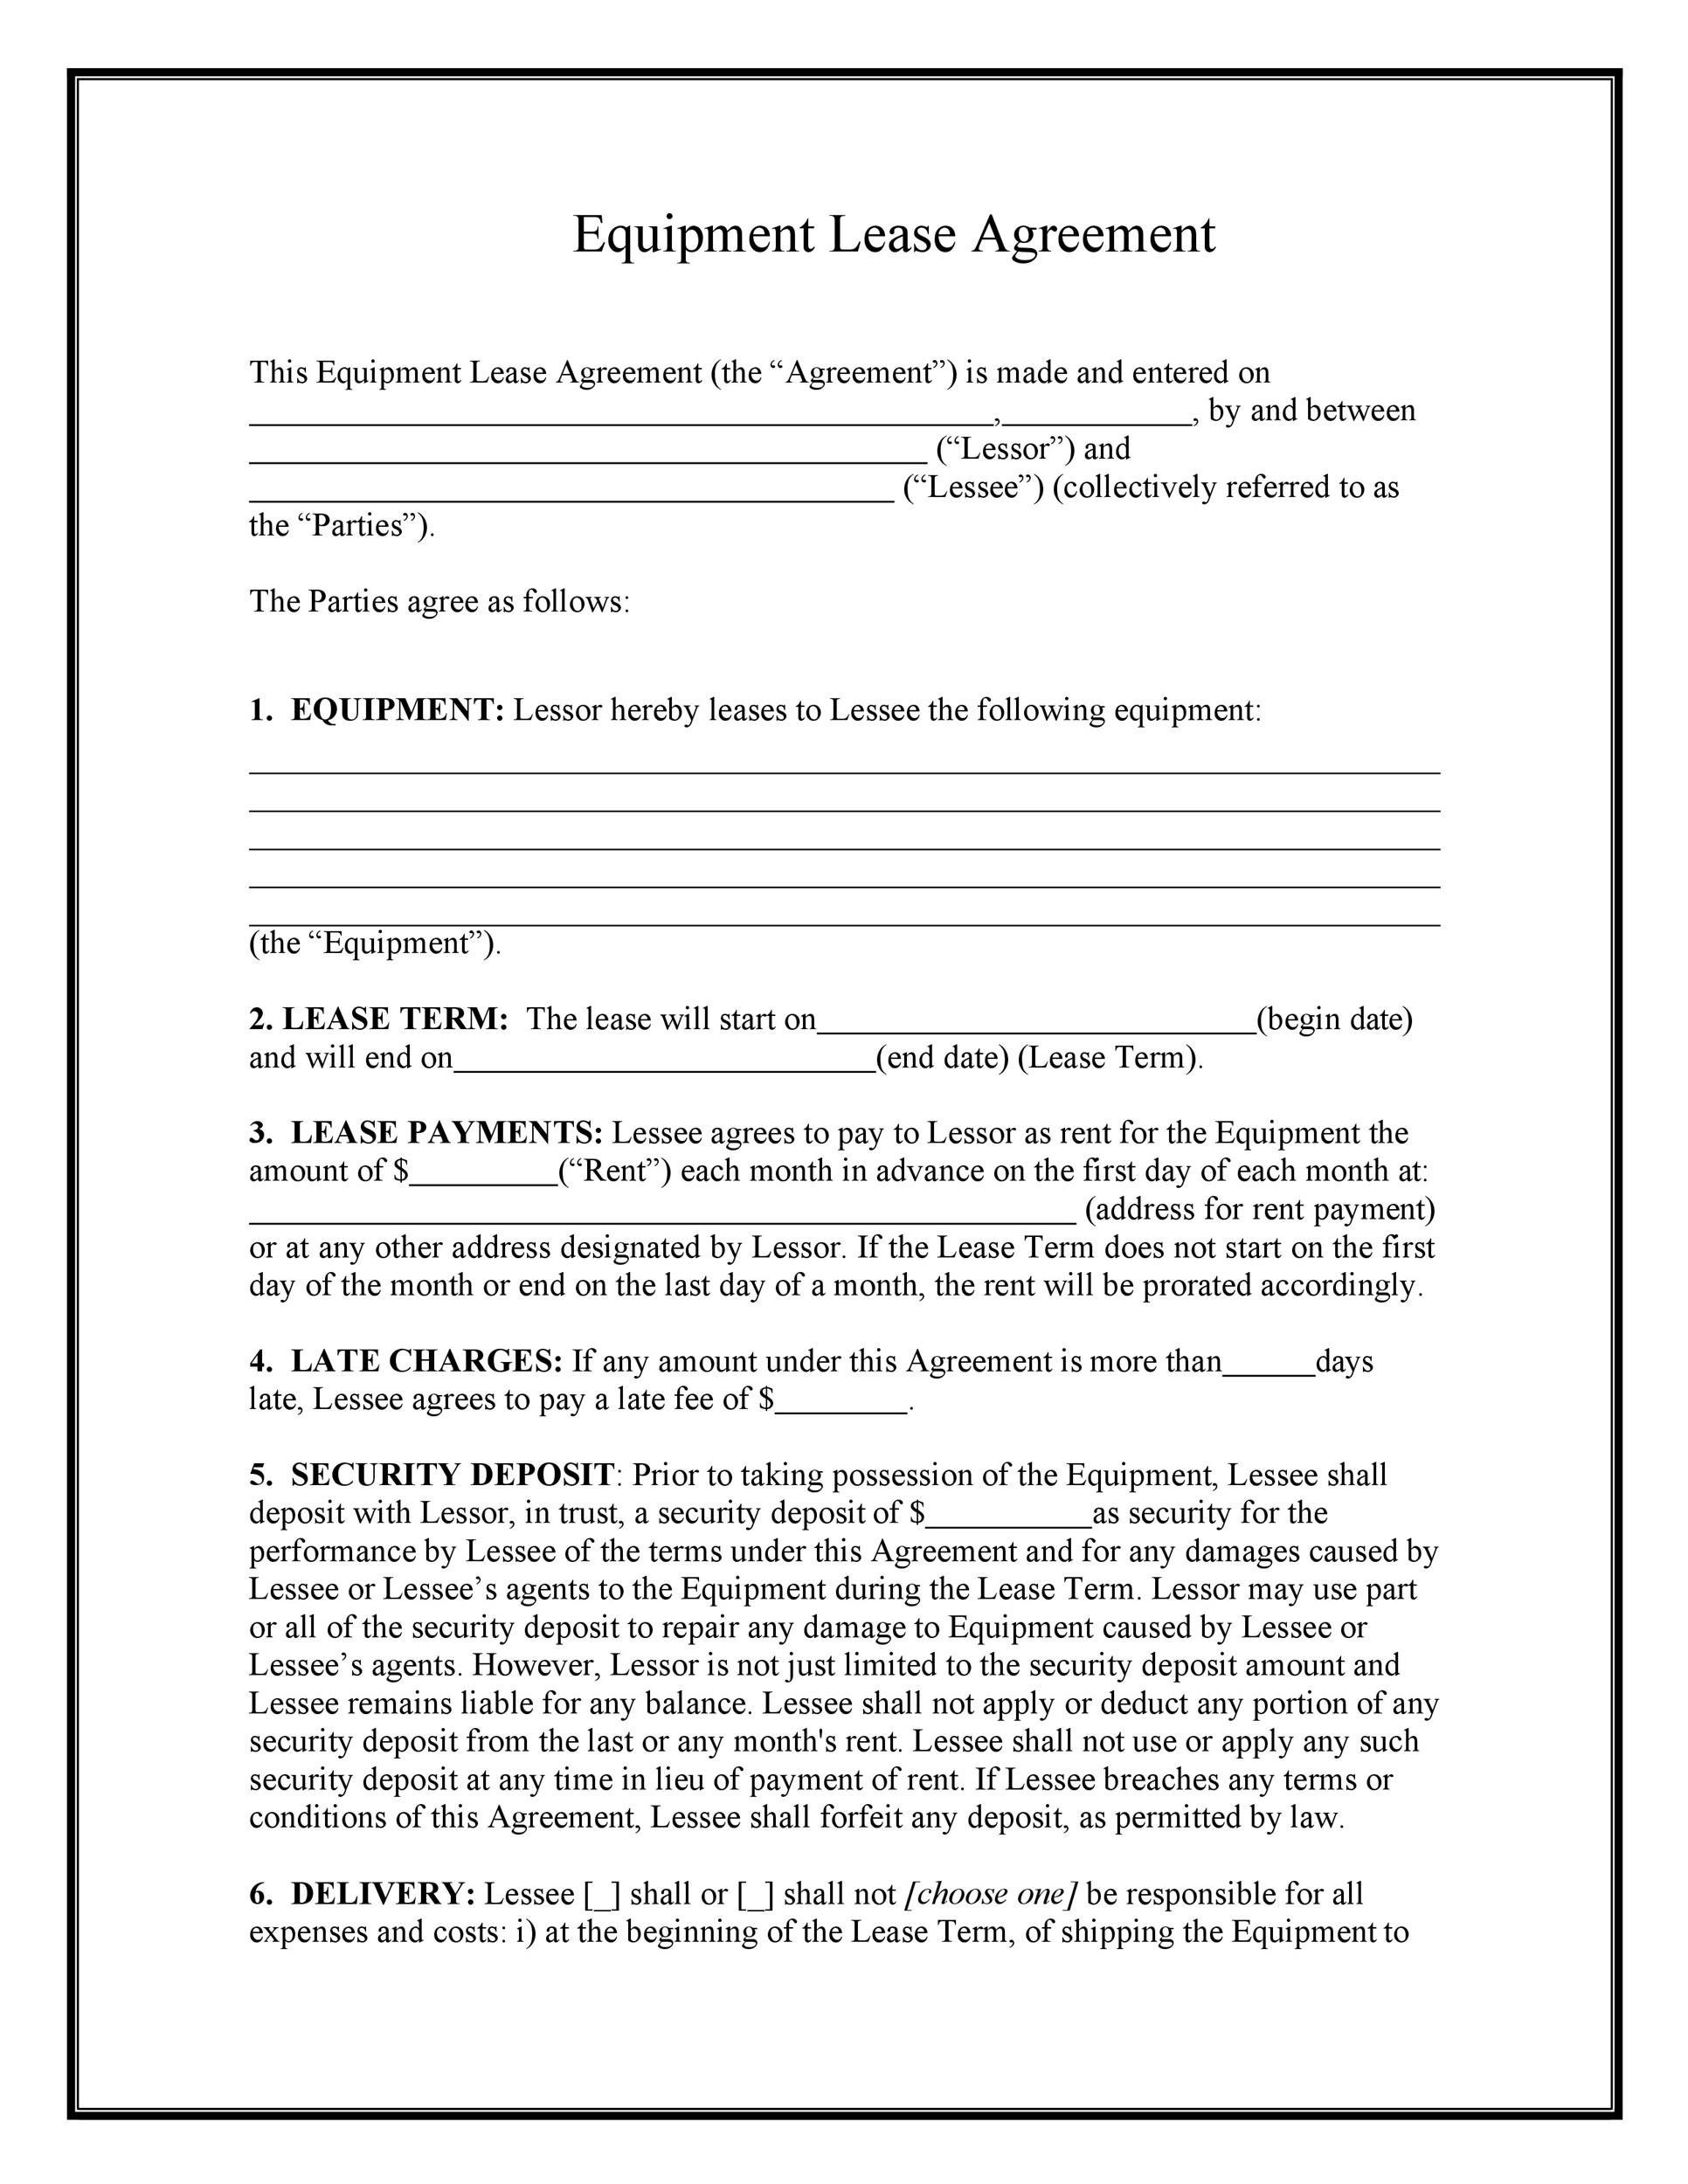 Free equipment lease agreement 01